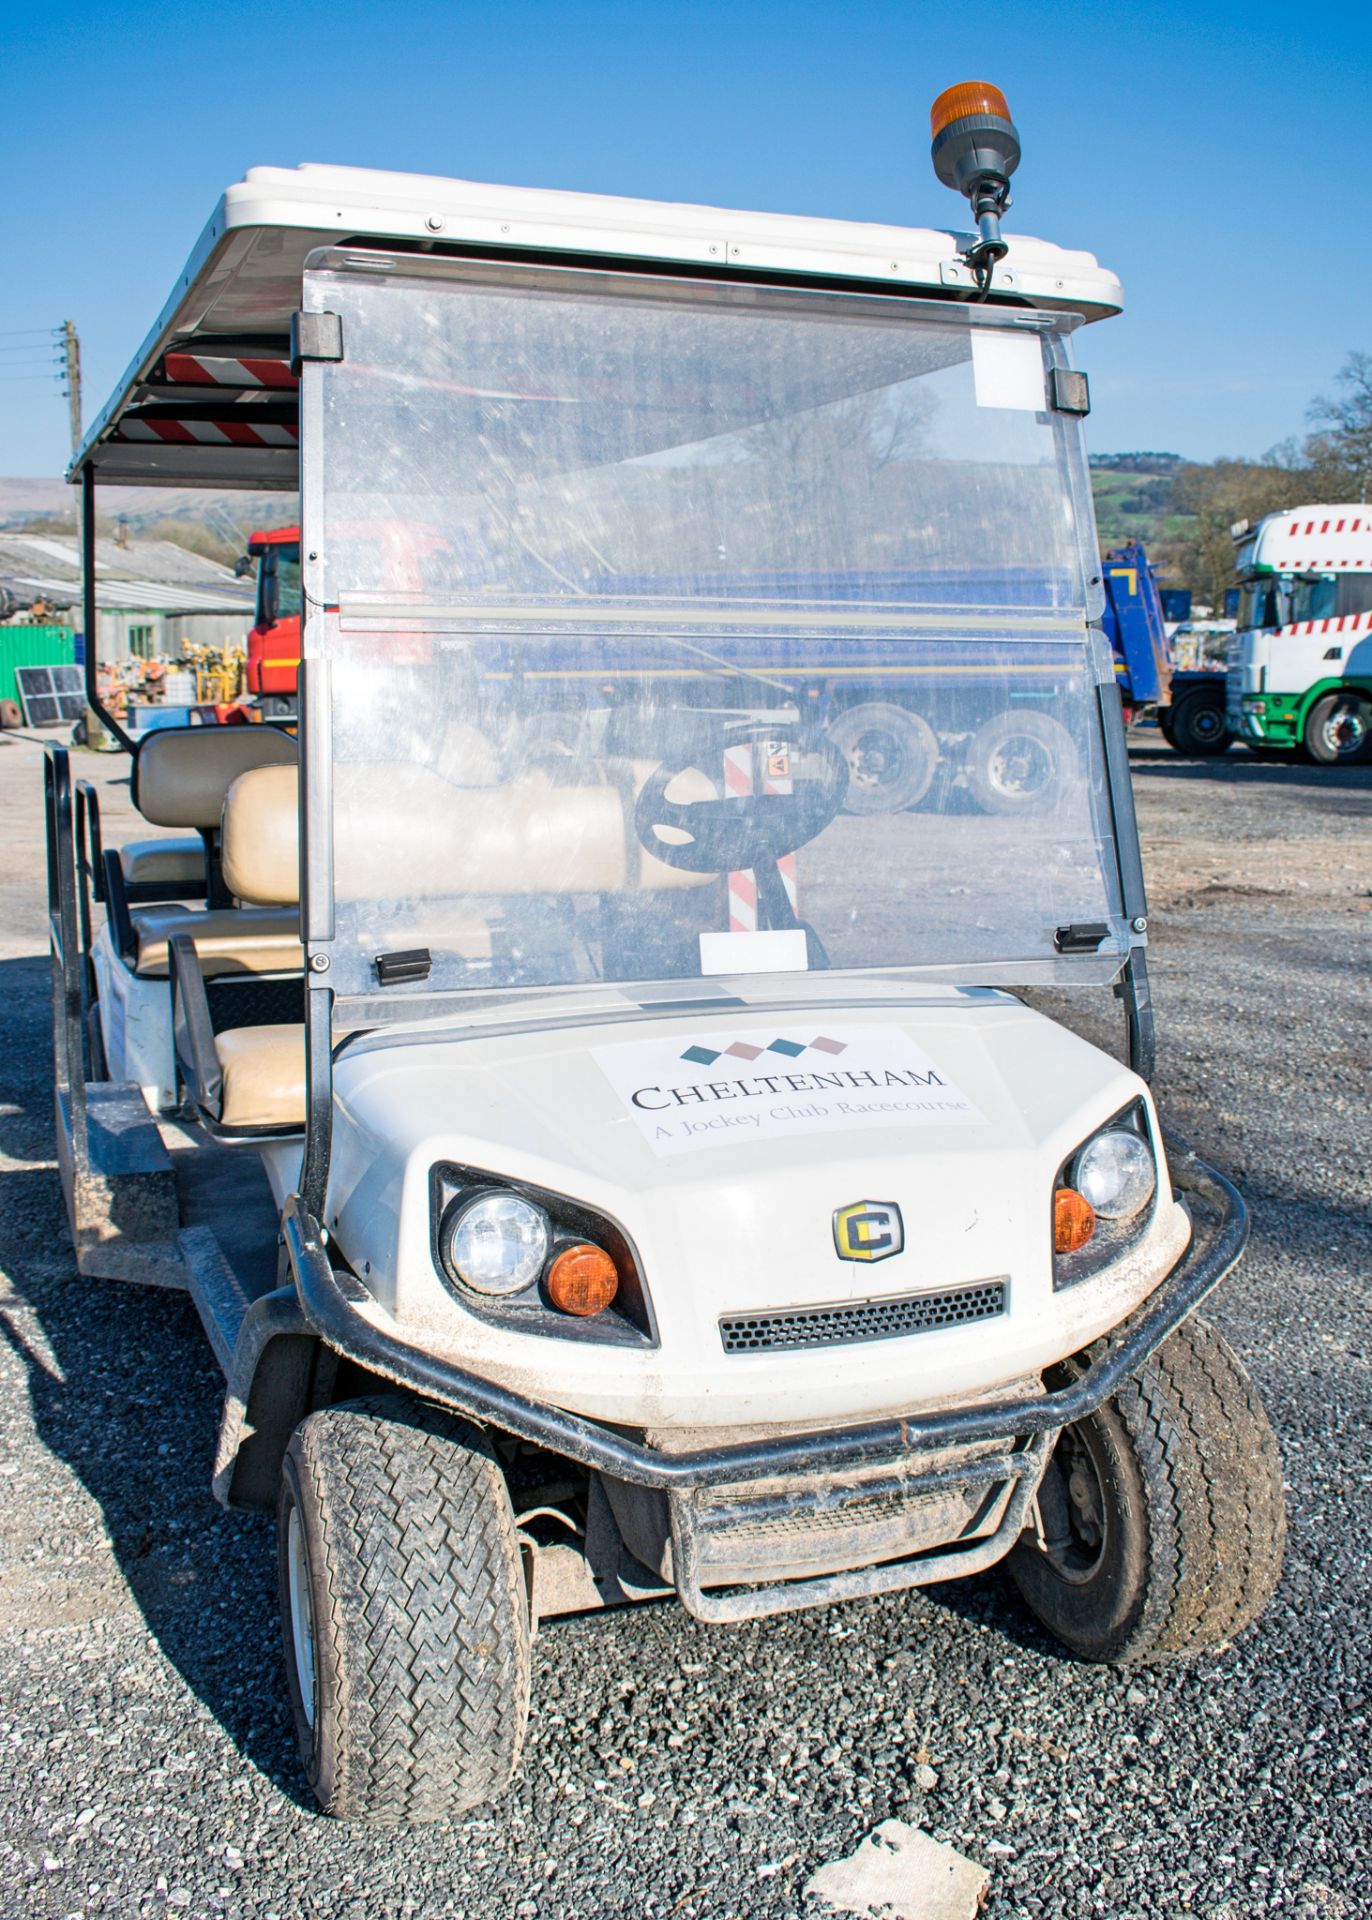 Cushman 6 seat & wheelchair petrol driven golf buggy Year: 2012 S/N: 2810404 Recorded Hours: 0163 - Image 5 of 8